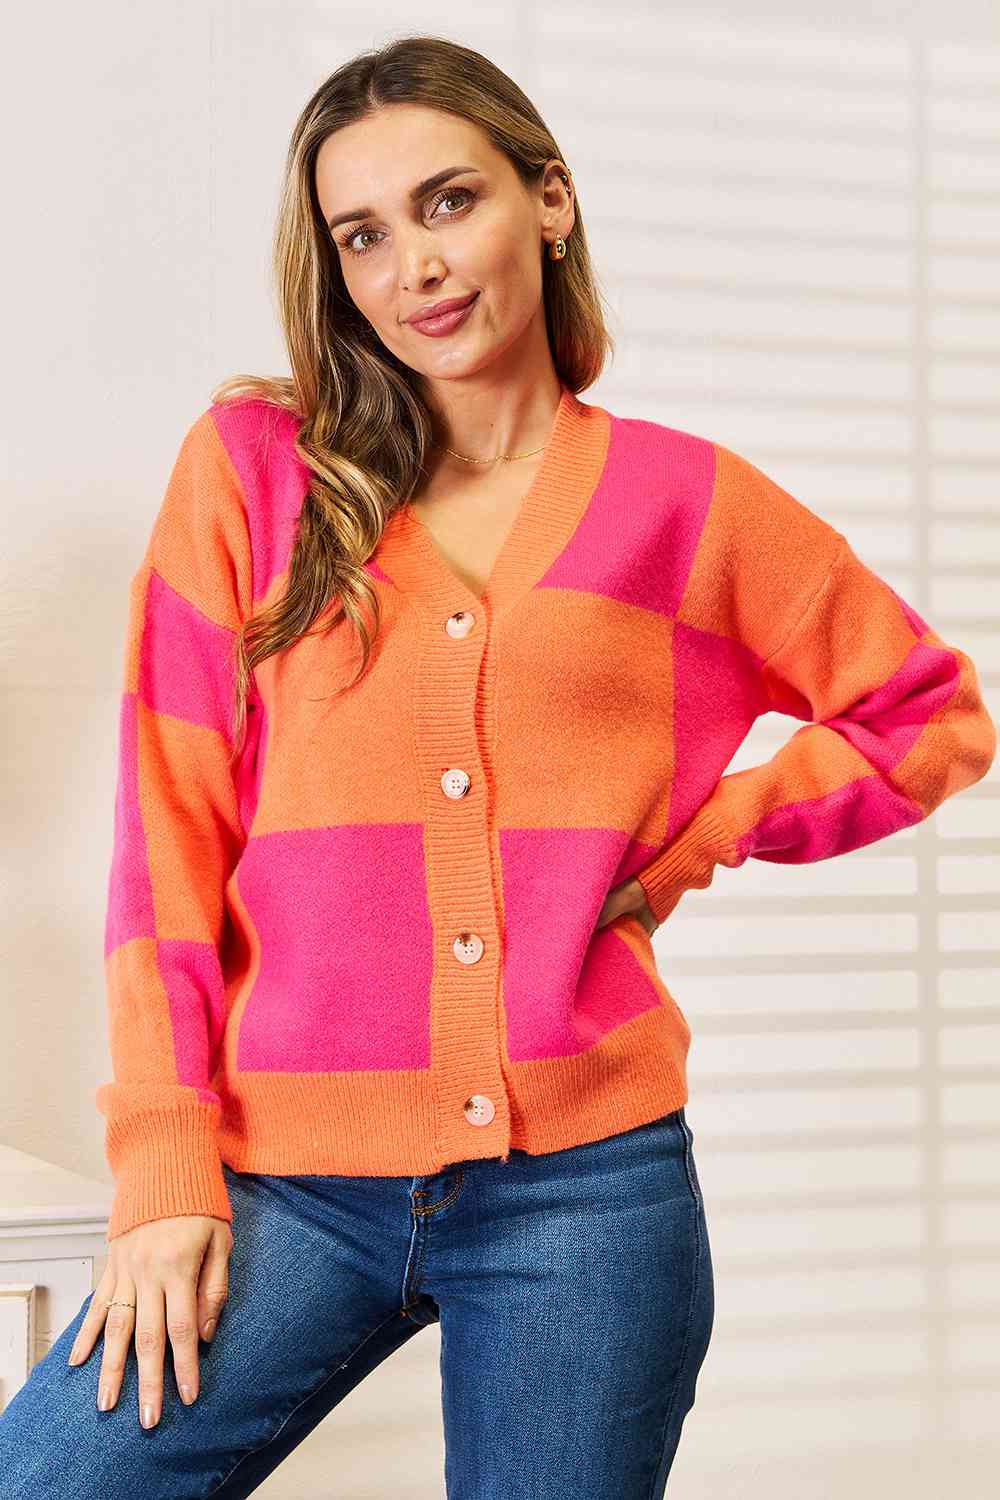 Checkered V-Neck Dropped Shoulder Cardigan - Women’s Clothing & Accessories - Shirts & Tops - 6 - 2024